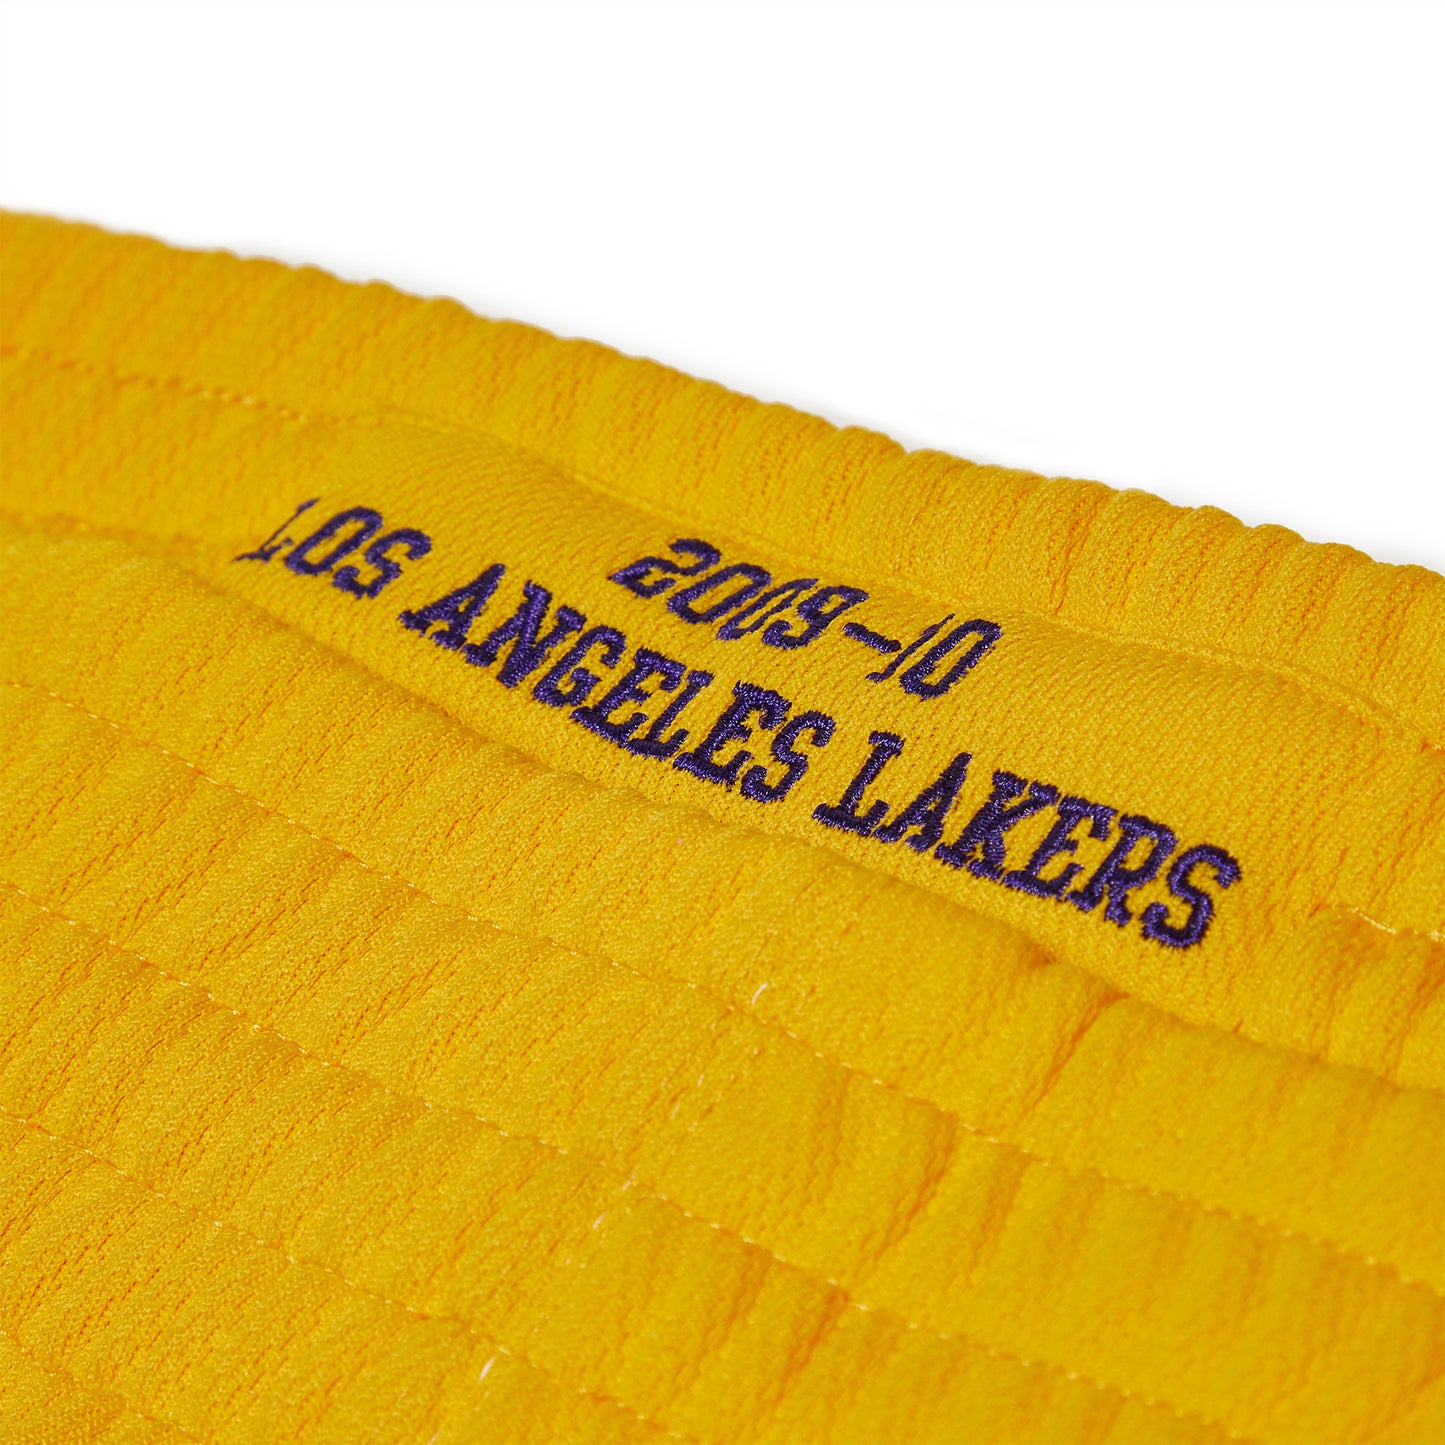 Mitchell & Ness Authentic Shorts - Los Angeles Lakers '09 (Light Gold)